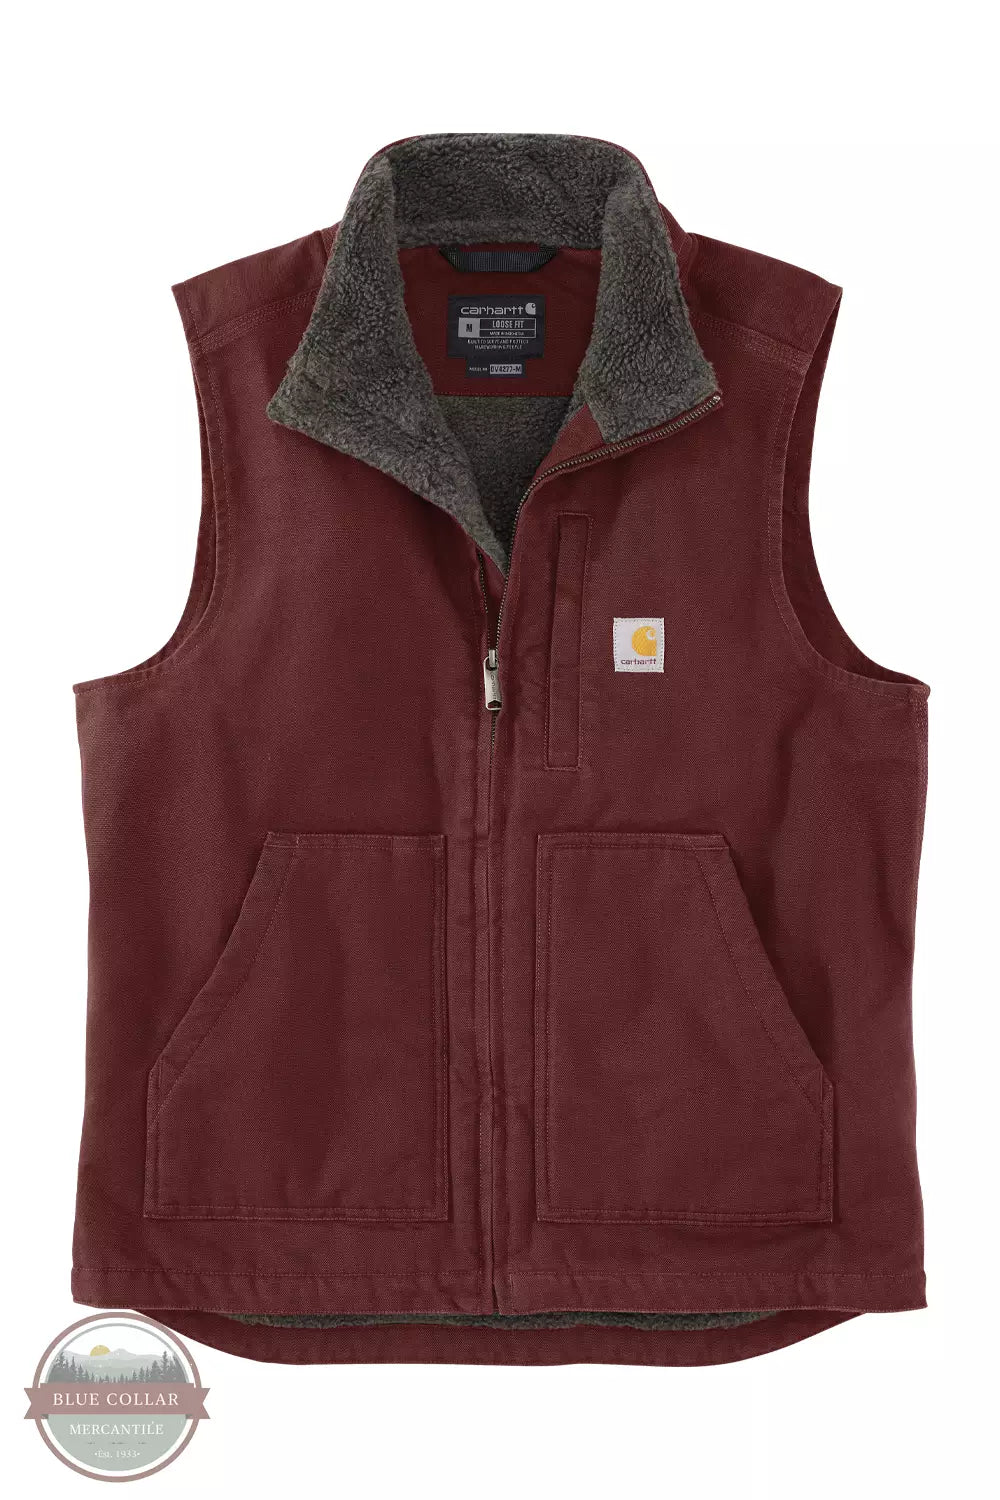 Carhartt 104277 Loose Fit Washed Duck Sherpa Lined Mock Neck Vest Burgundy Front View